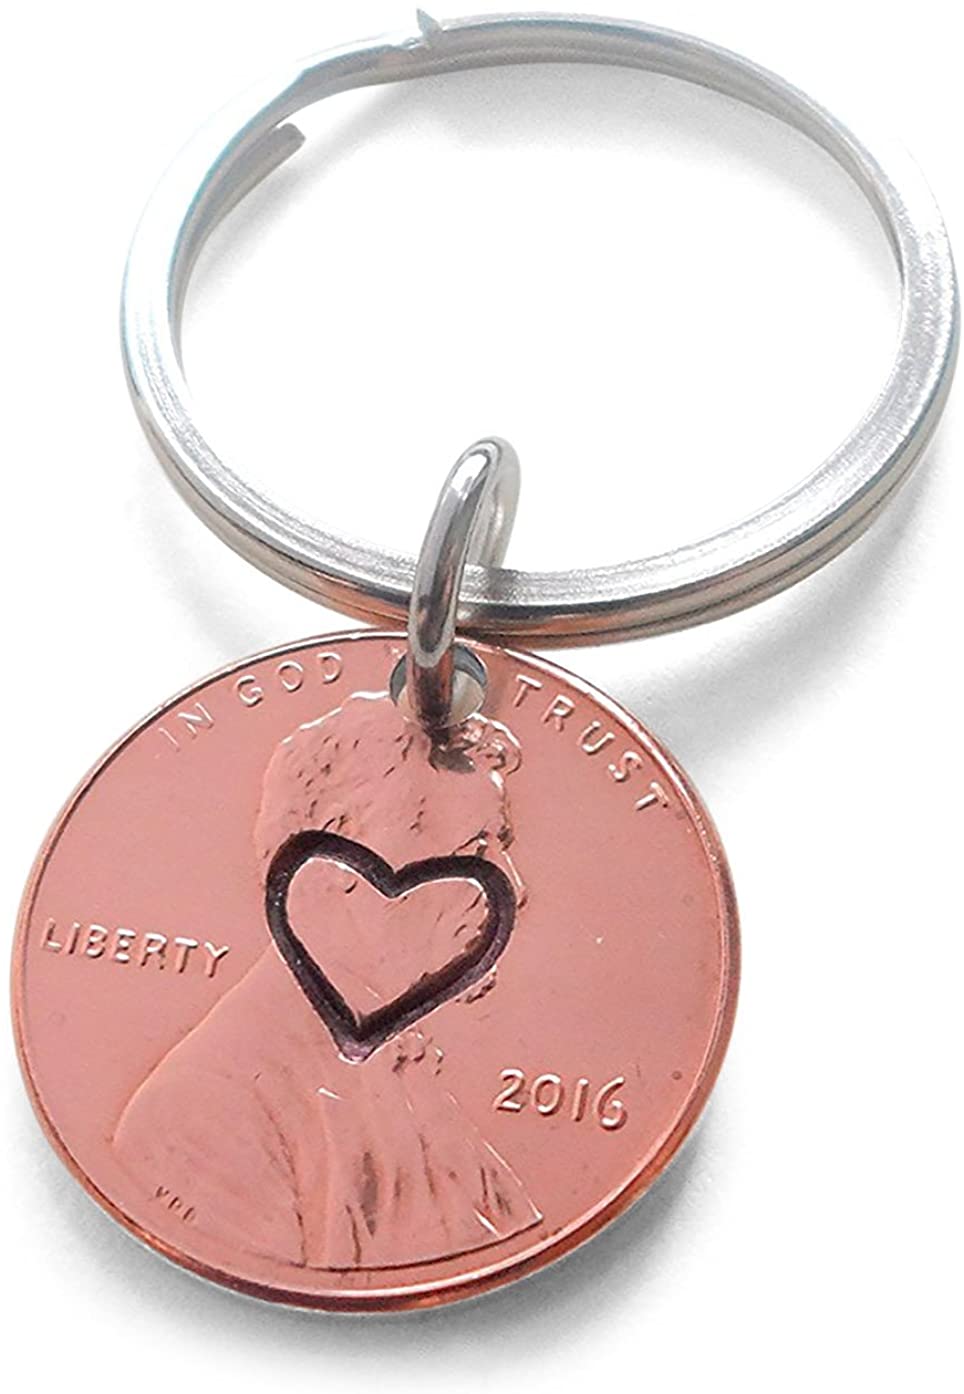 Centered Heart Stamped on 2016 Penny Keychain; 6 Year Anniversary Gift